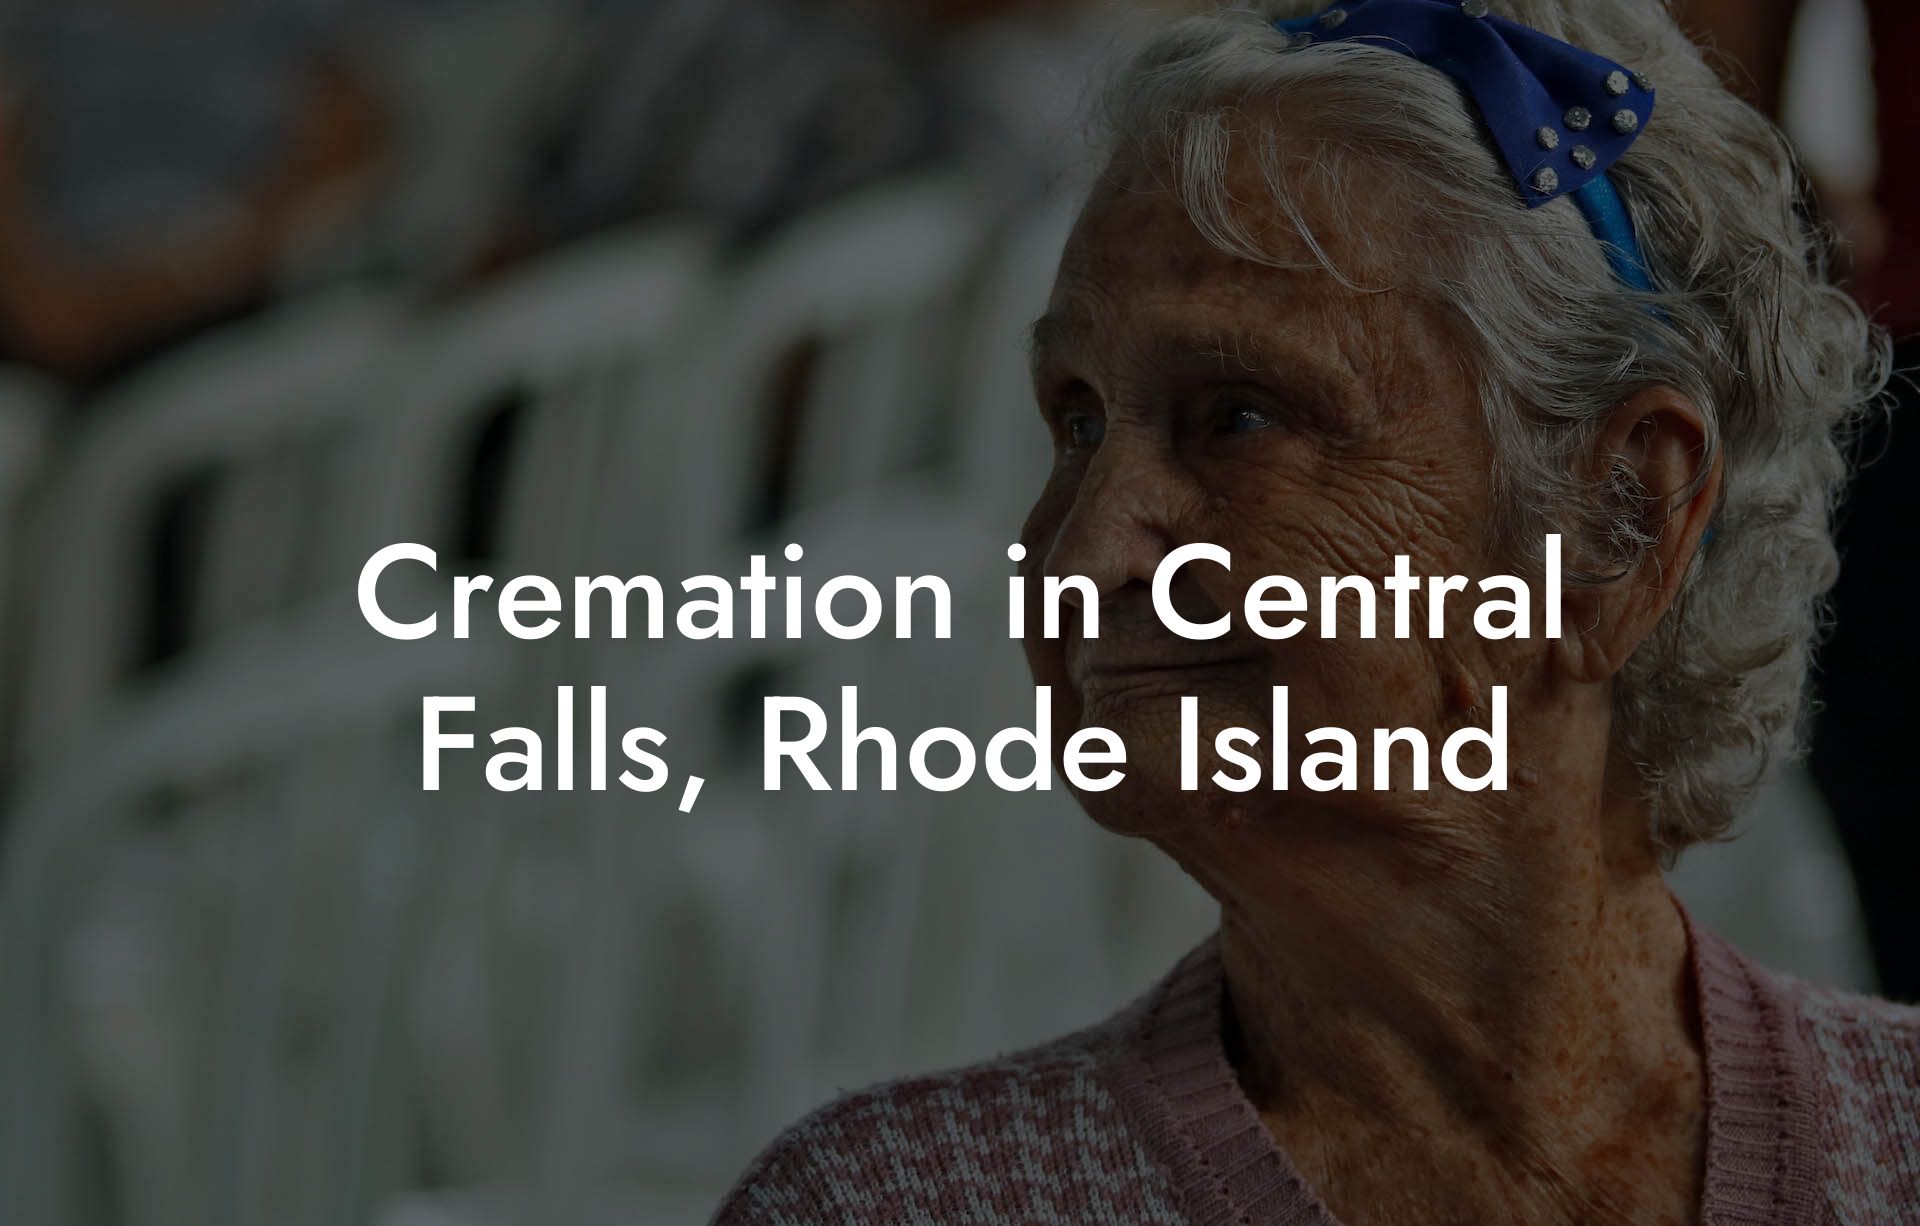 Cremation in Central Falls, Rhode Island